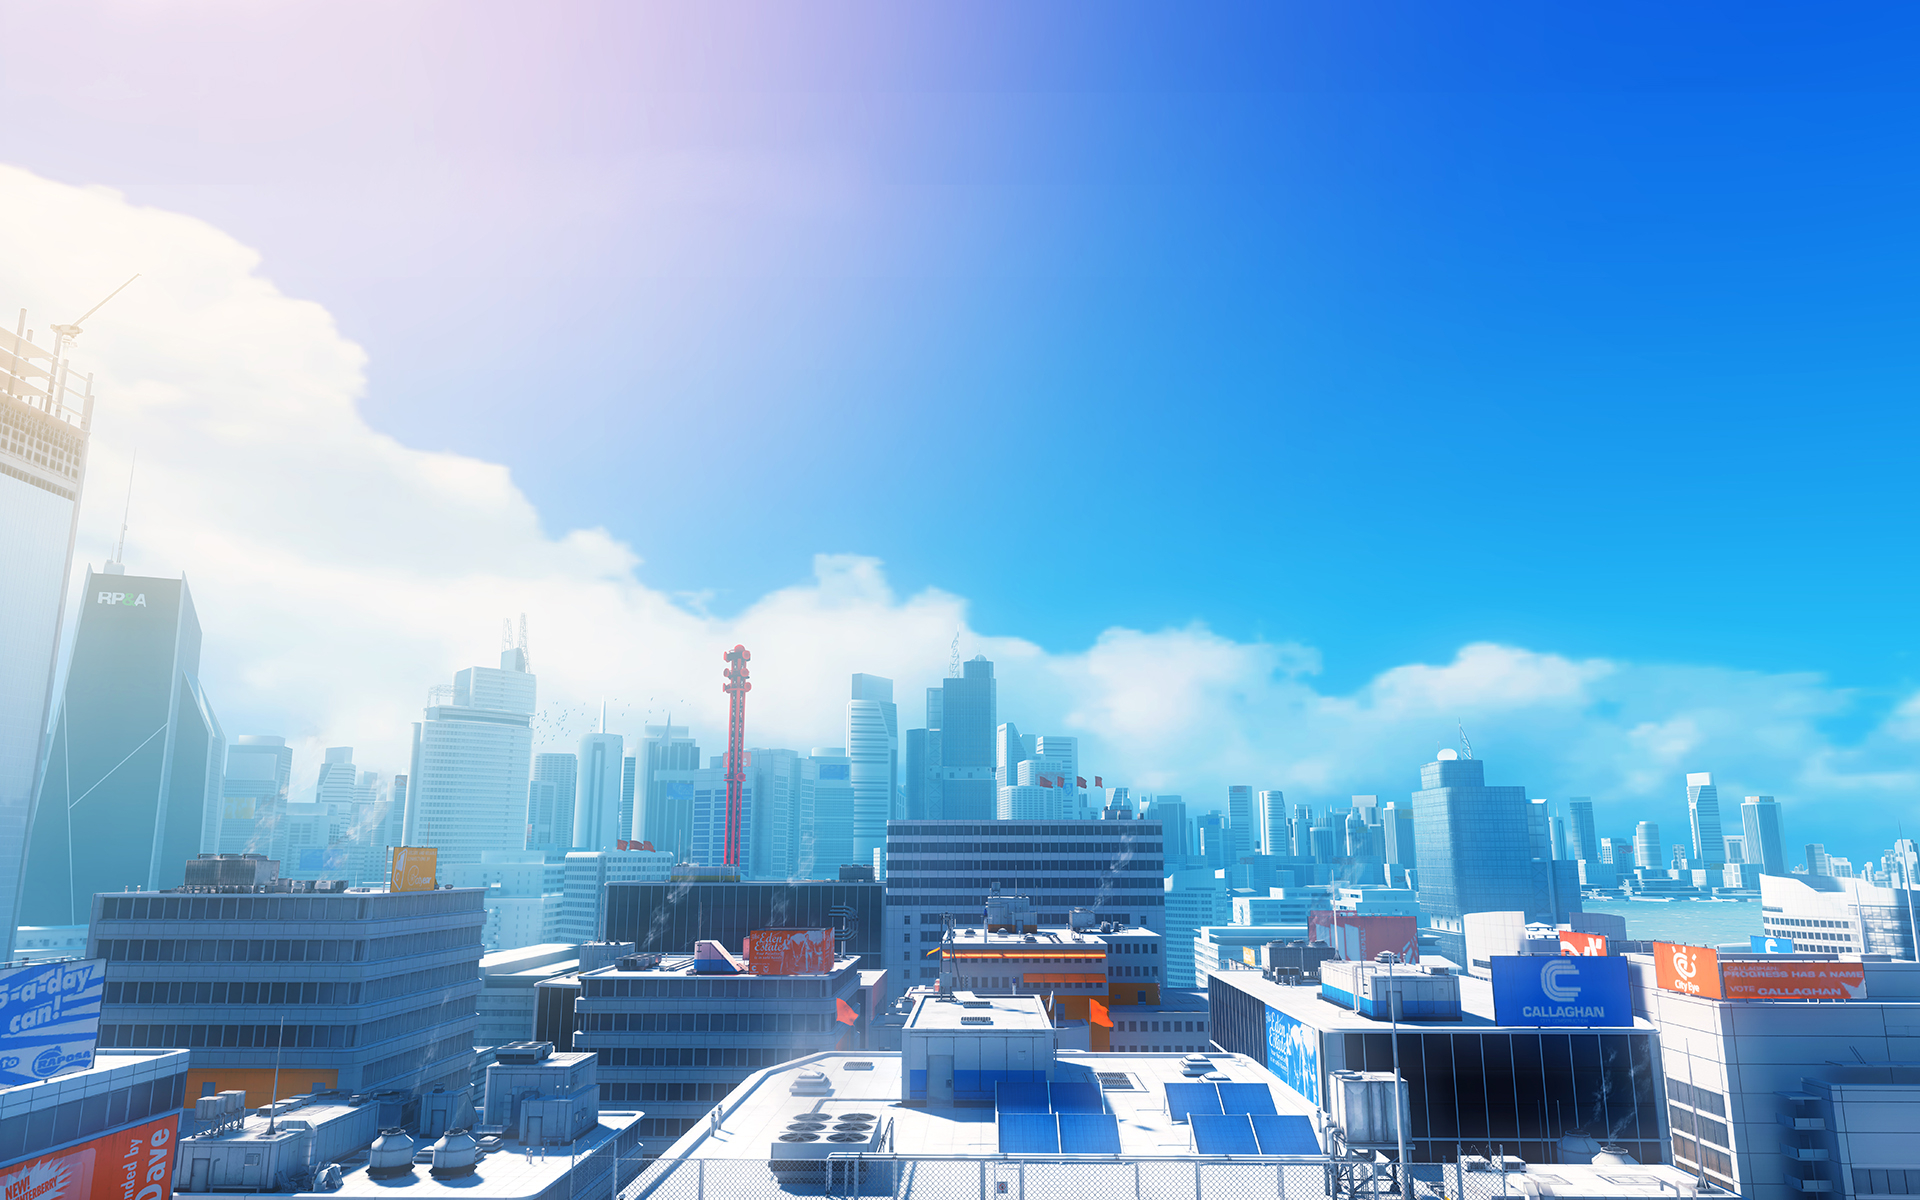 Free Download Mirrors Edge Hd Wallpaper 25 1920 X 1200 Stmednet Images, Photos, Reviews